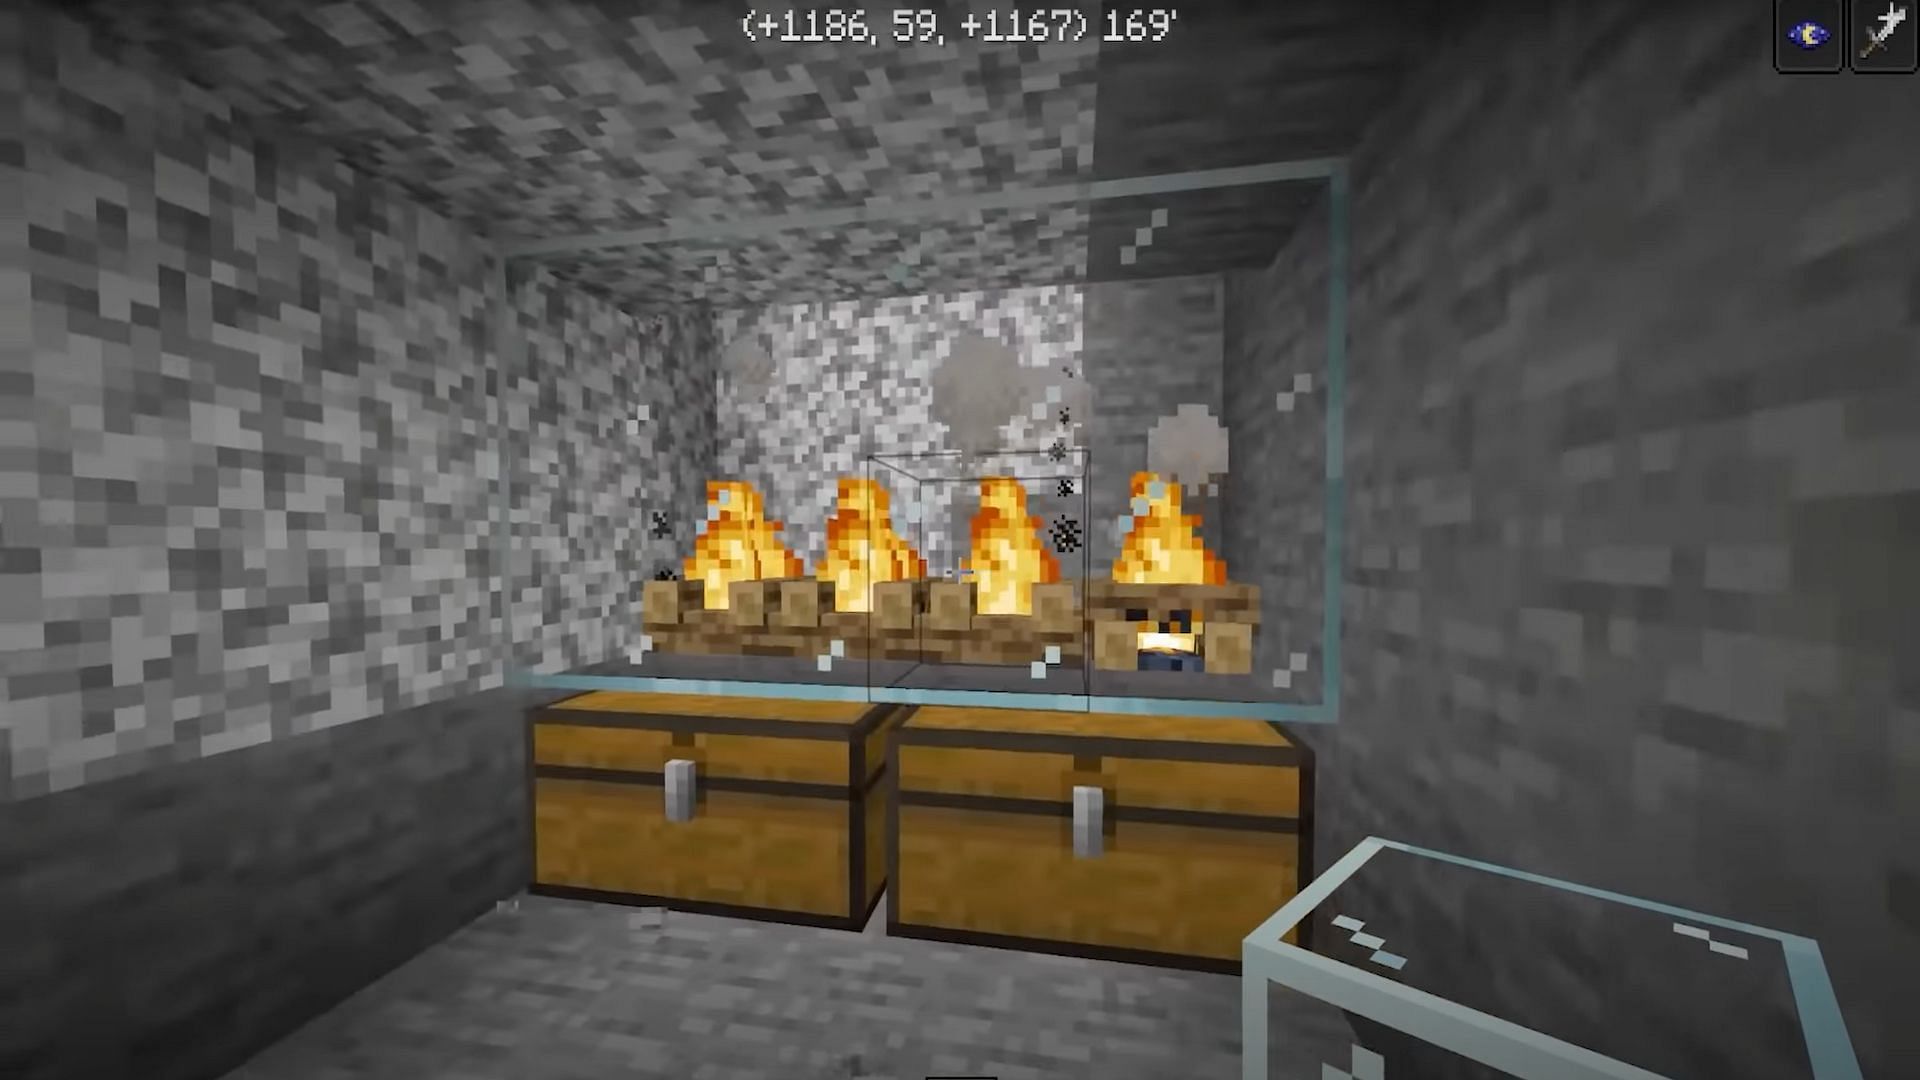 Players of Minecraft must place a glass wall in front of the campfires (Image via Dusty Dude/YouTube)